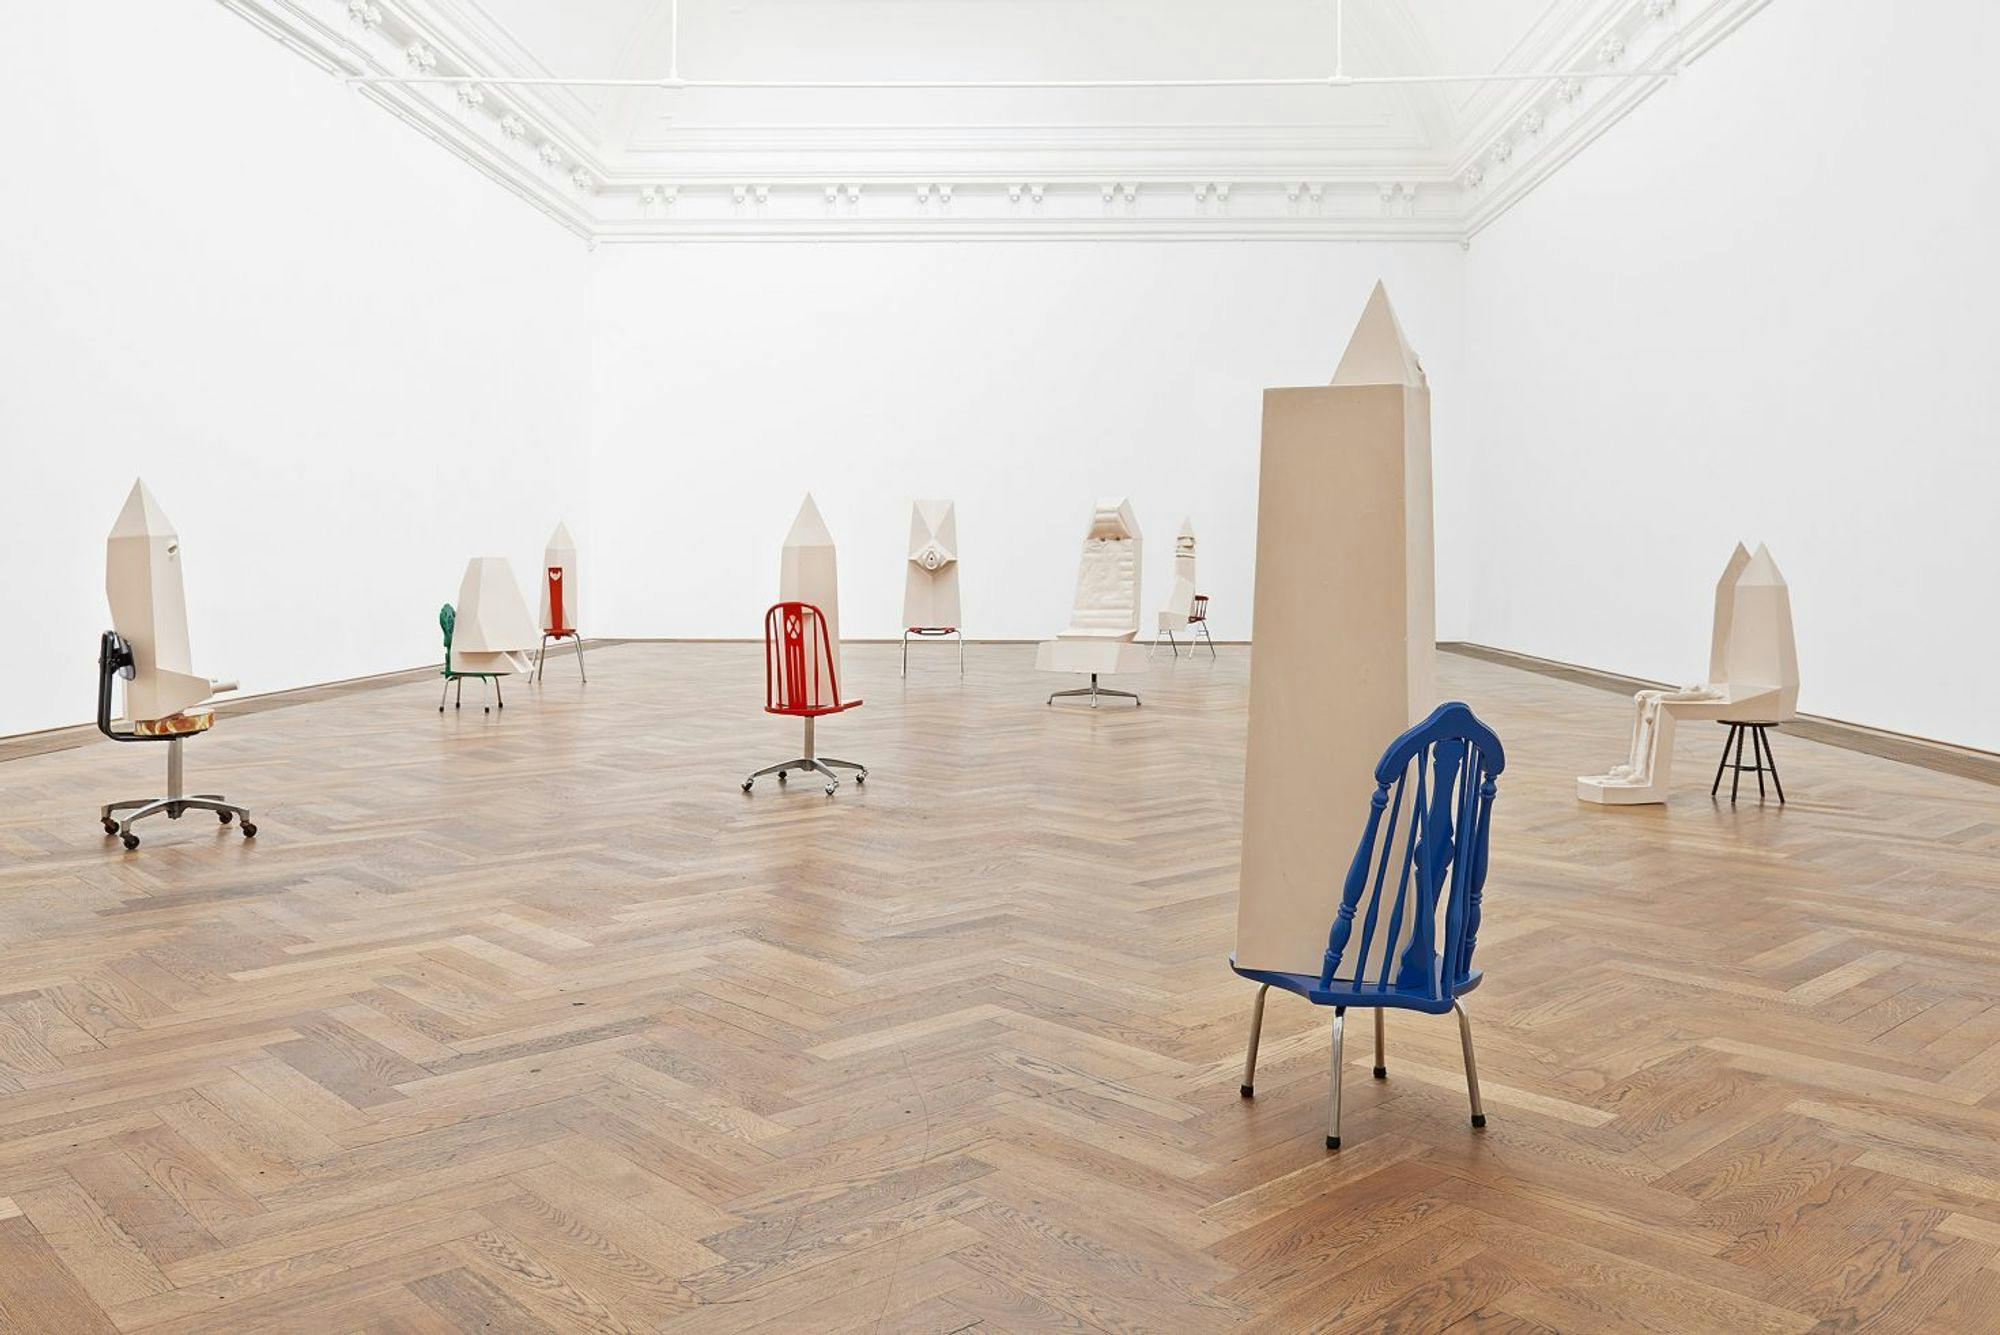 An installation view of works by Andra Ursuţa on view at Kunsthalle Basel